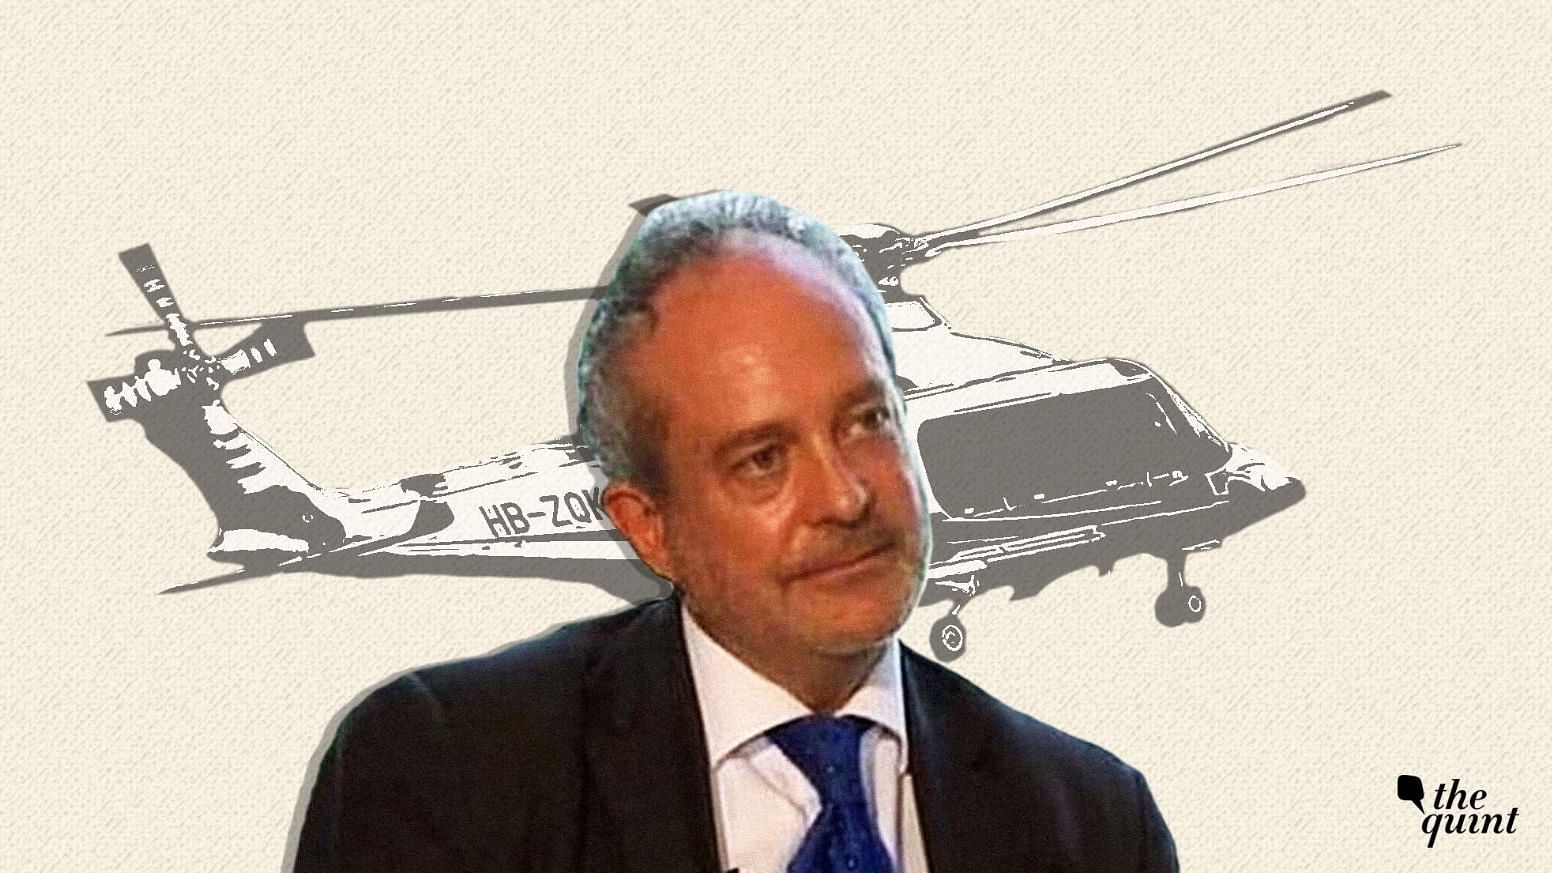 Christian Michel was arrested by the ED on 22 December last year after his extradition from Dubai.